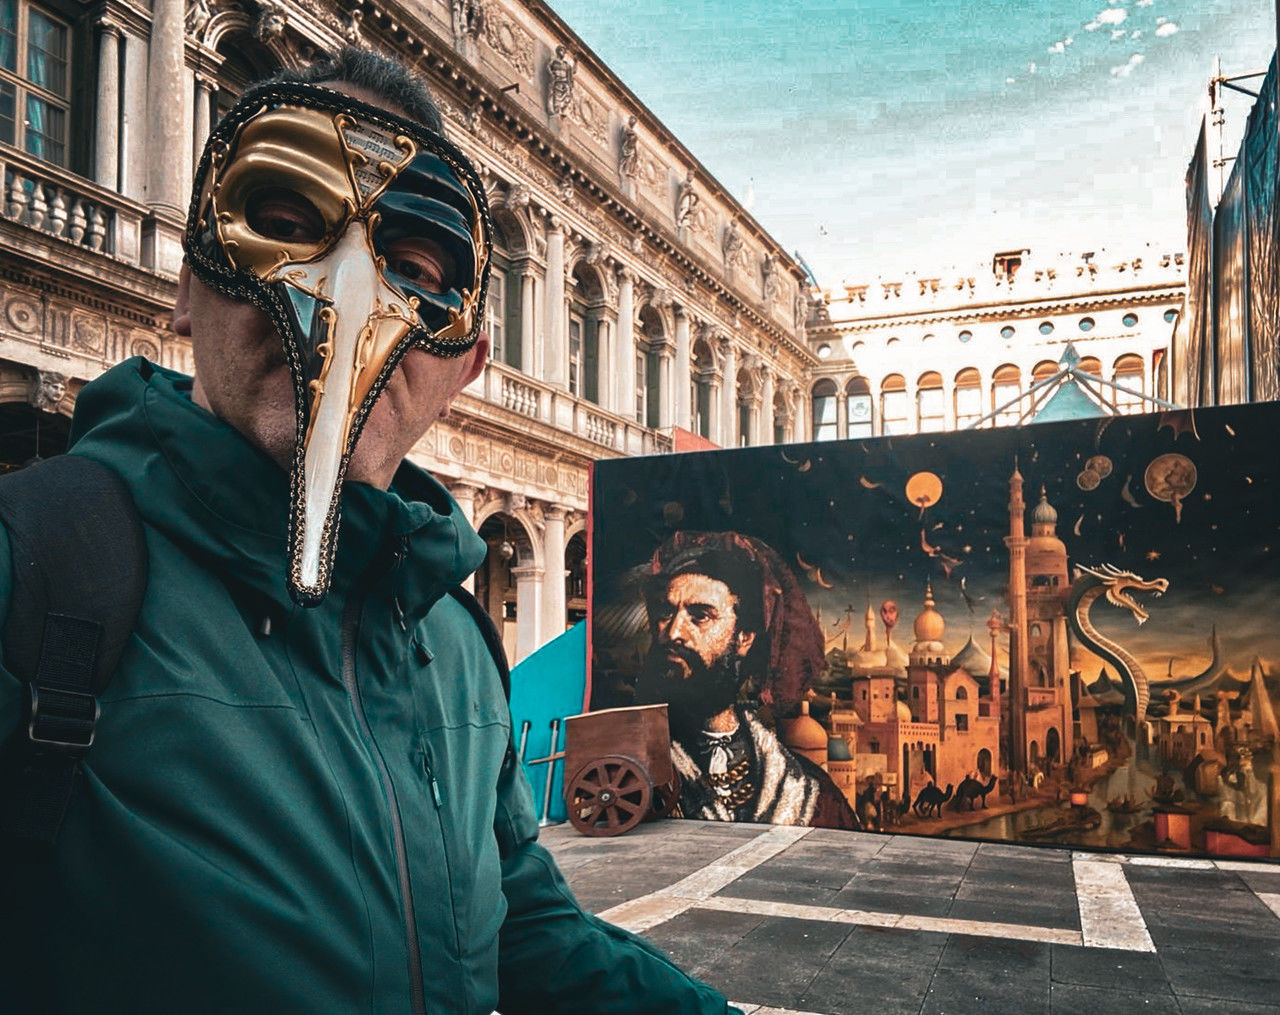 architecture, city, adult, building exterior, men, built structure, street, travel destinations, one person, person, mask, road, disguise, mask - disguise, sky, clothing, tourism, city life, human face, travel, nature, crowd, outdoors, arts culture and entertainment